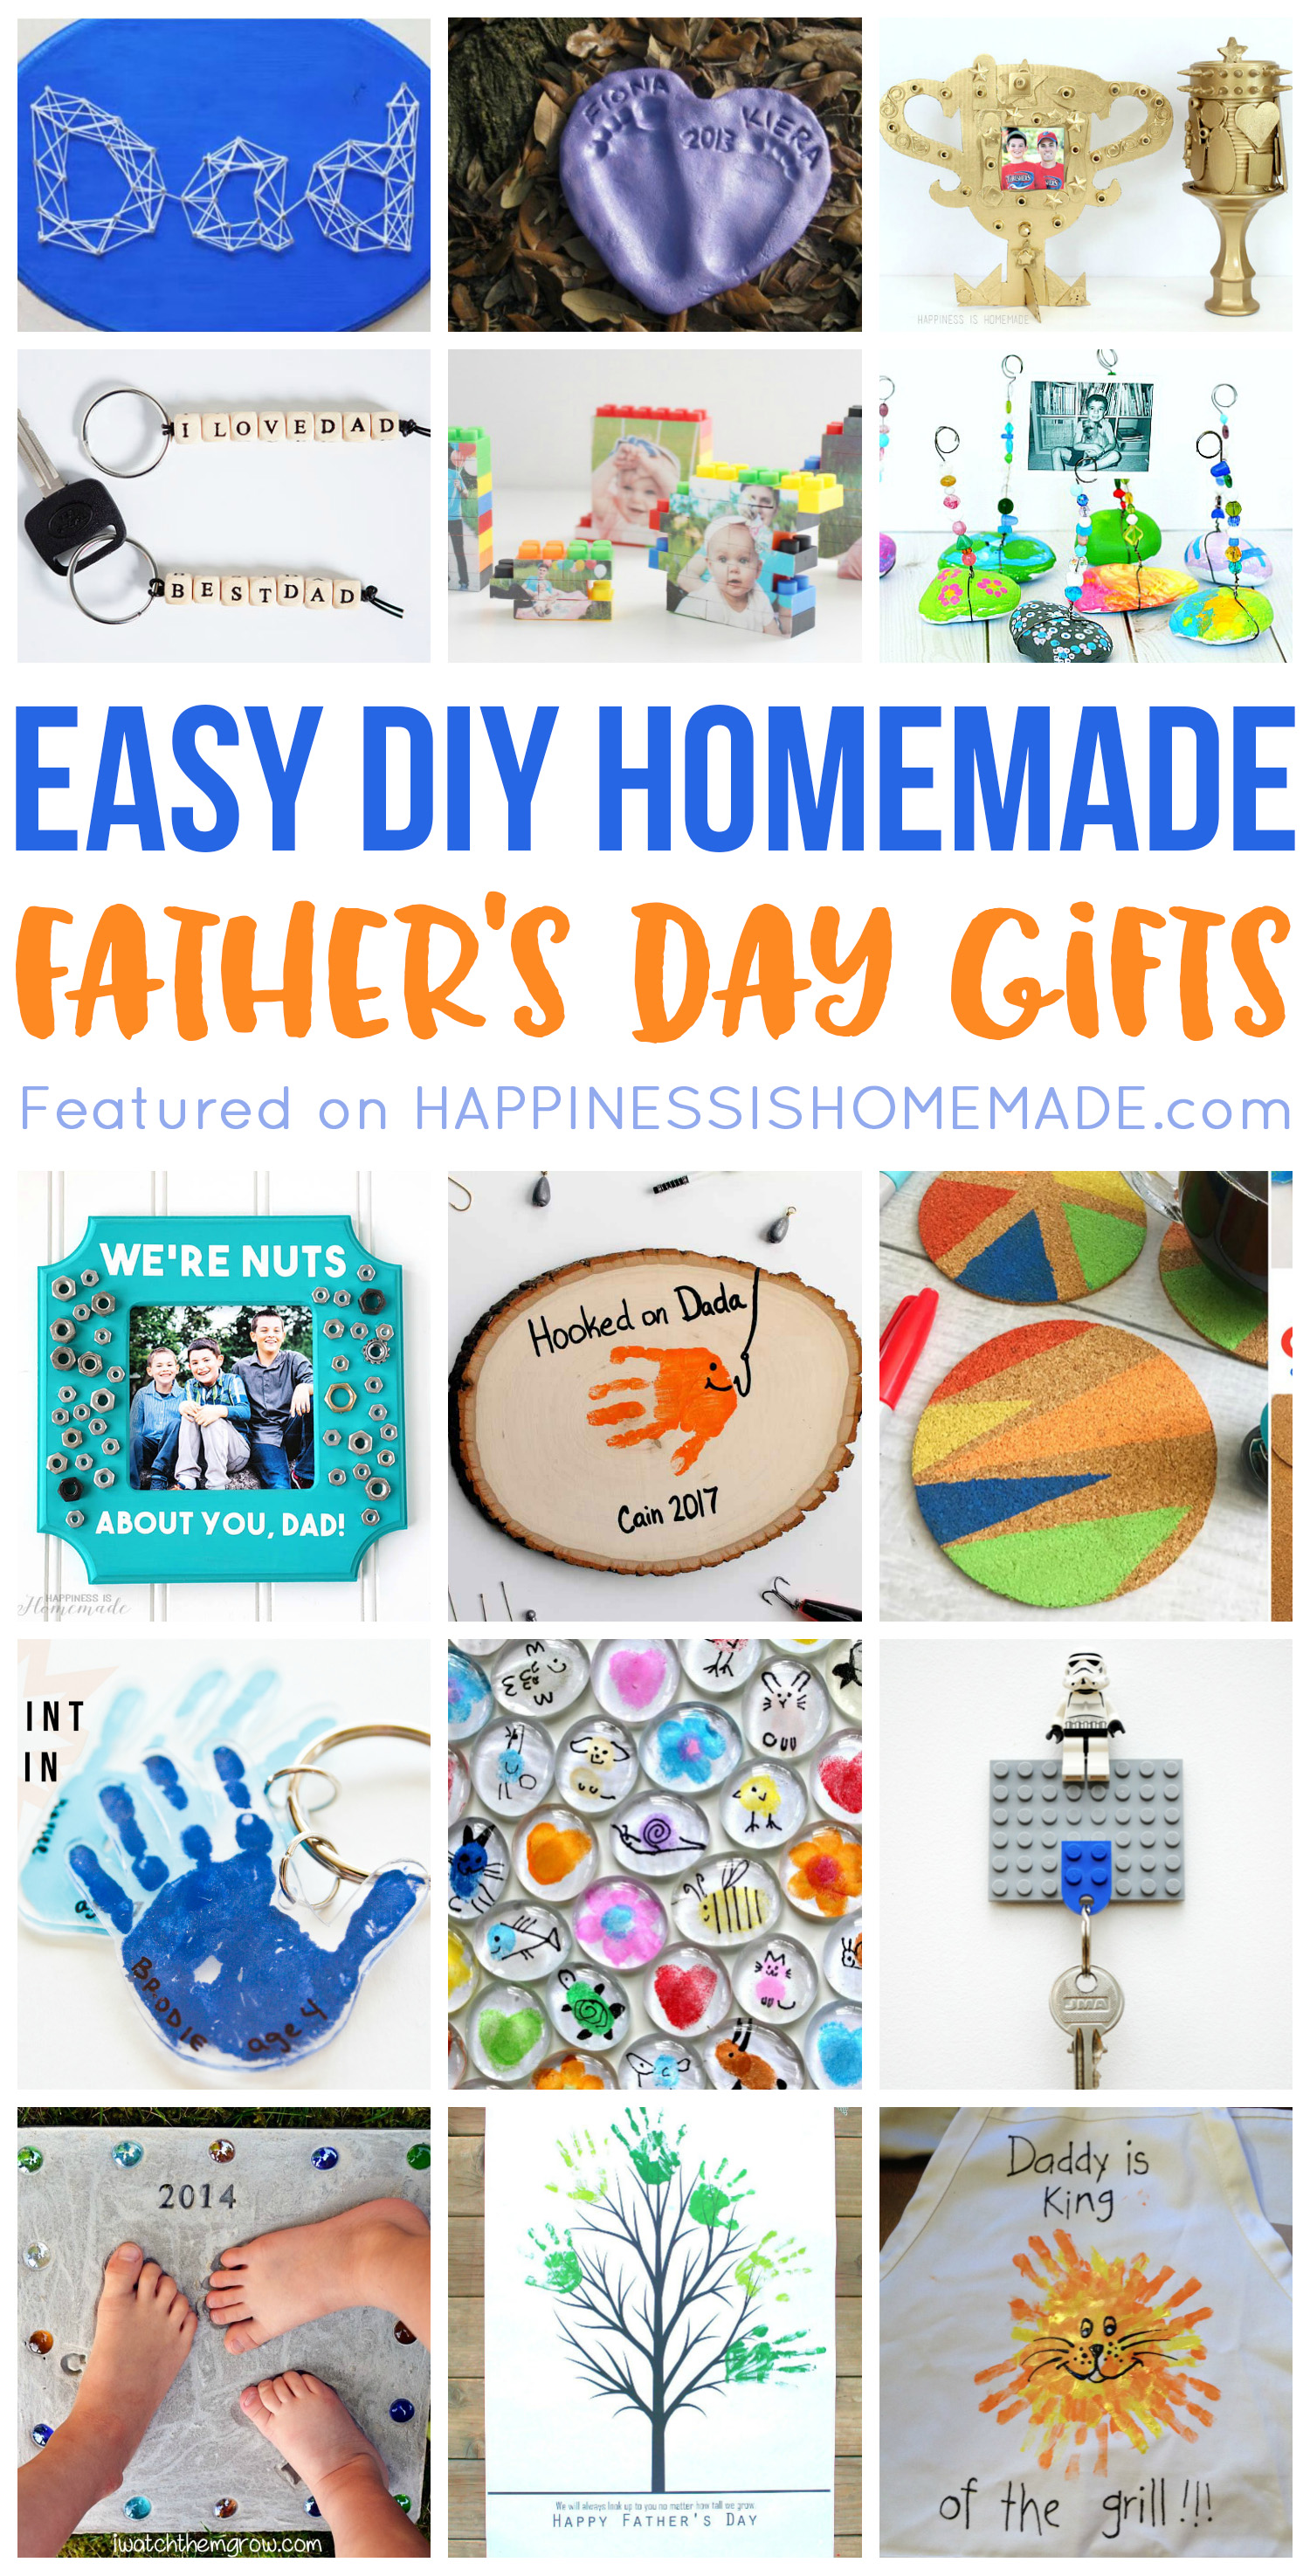 20+ Homemade Father's Day Gifts That Kids Can Make - Happiness is Homemade